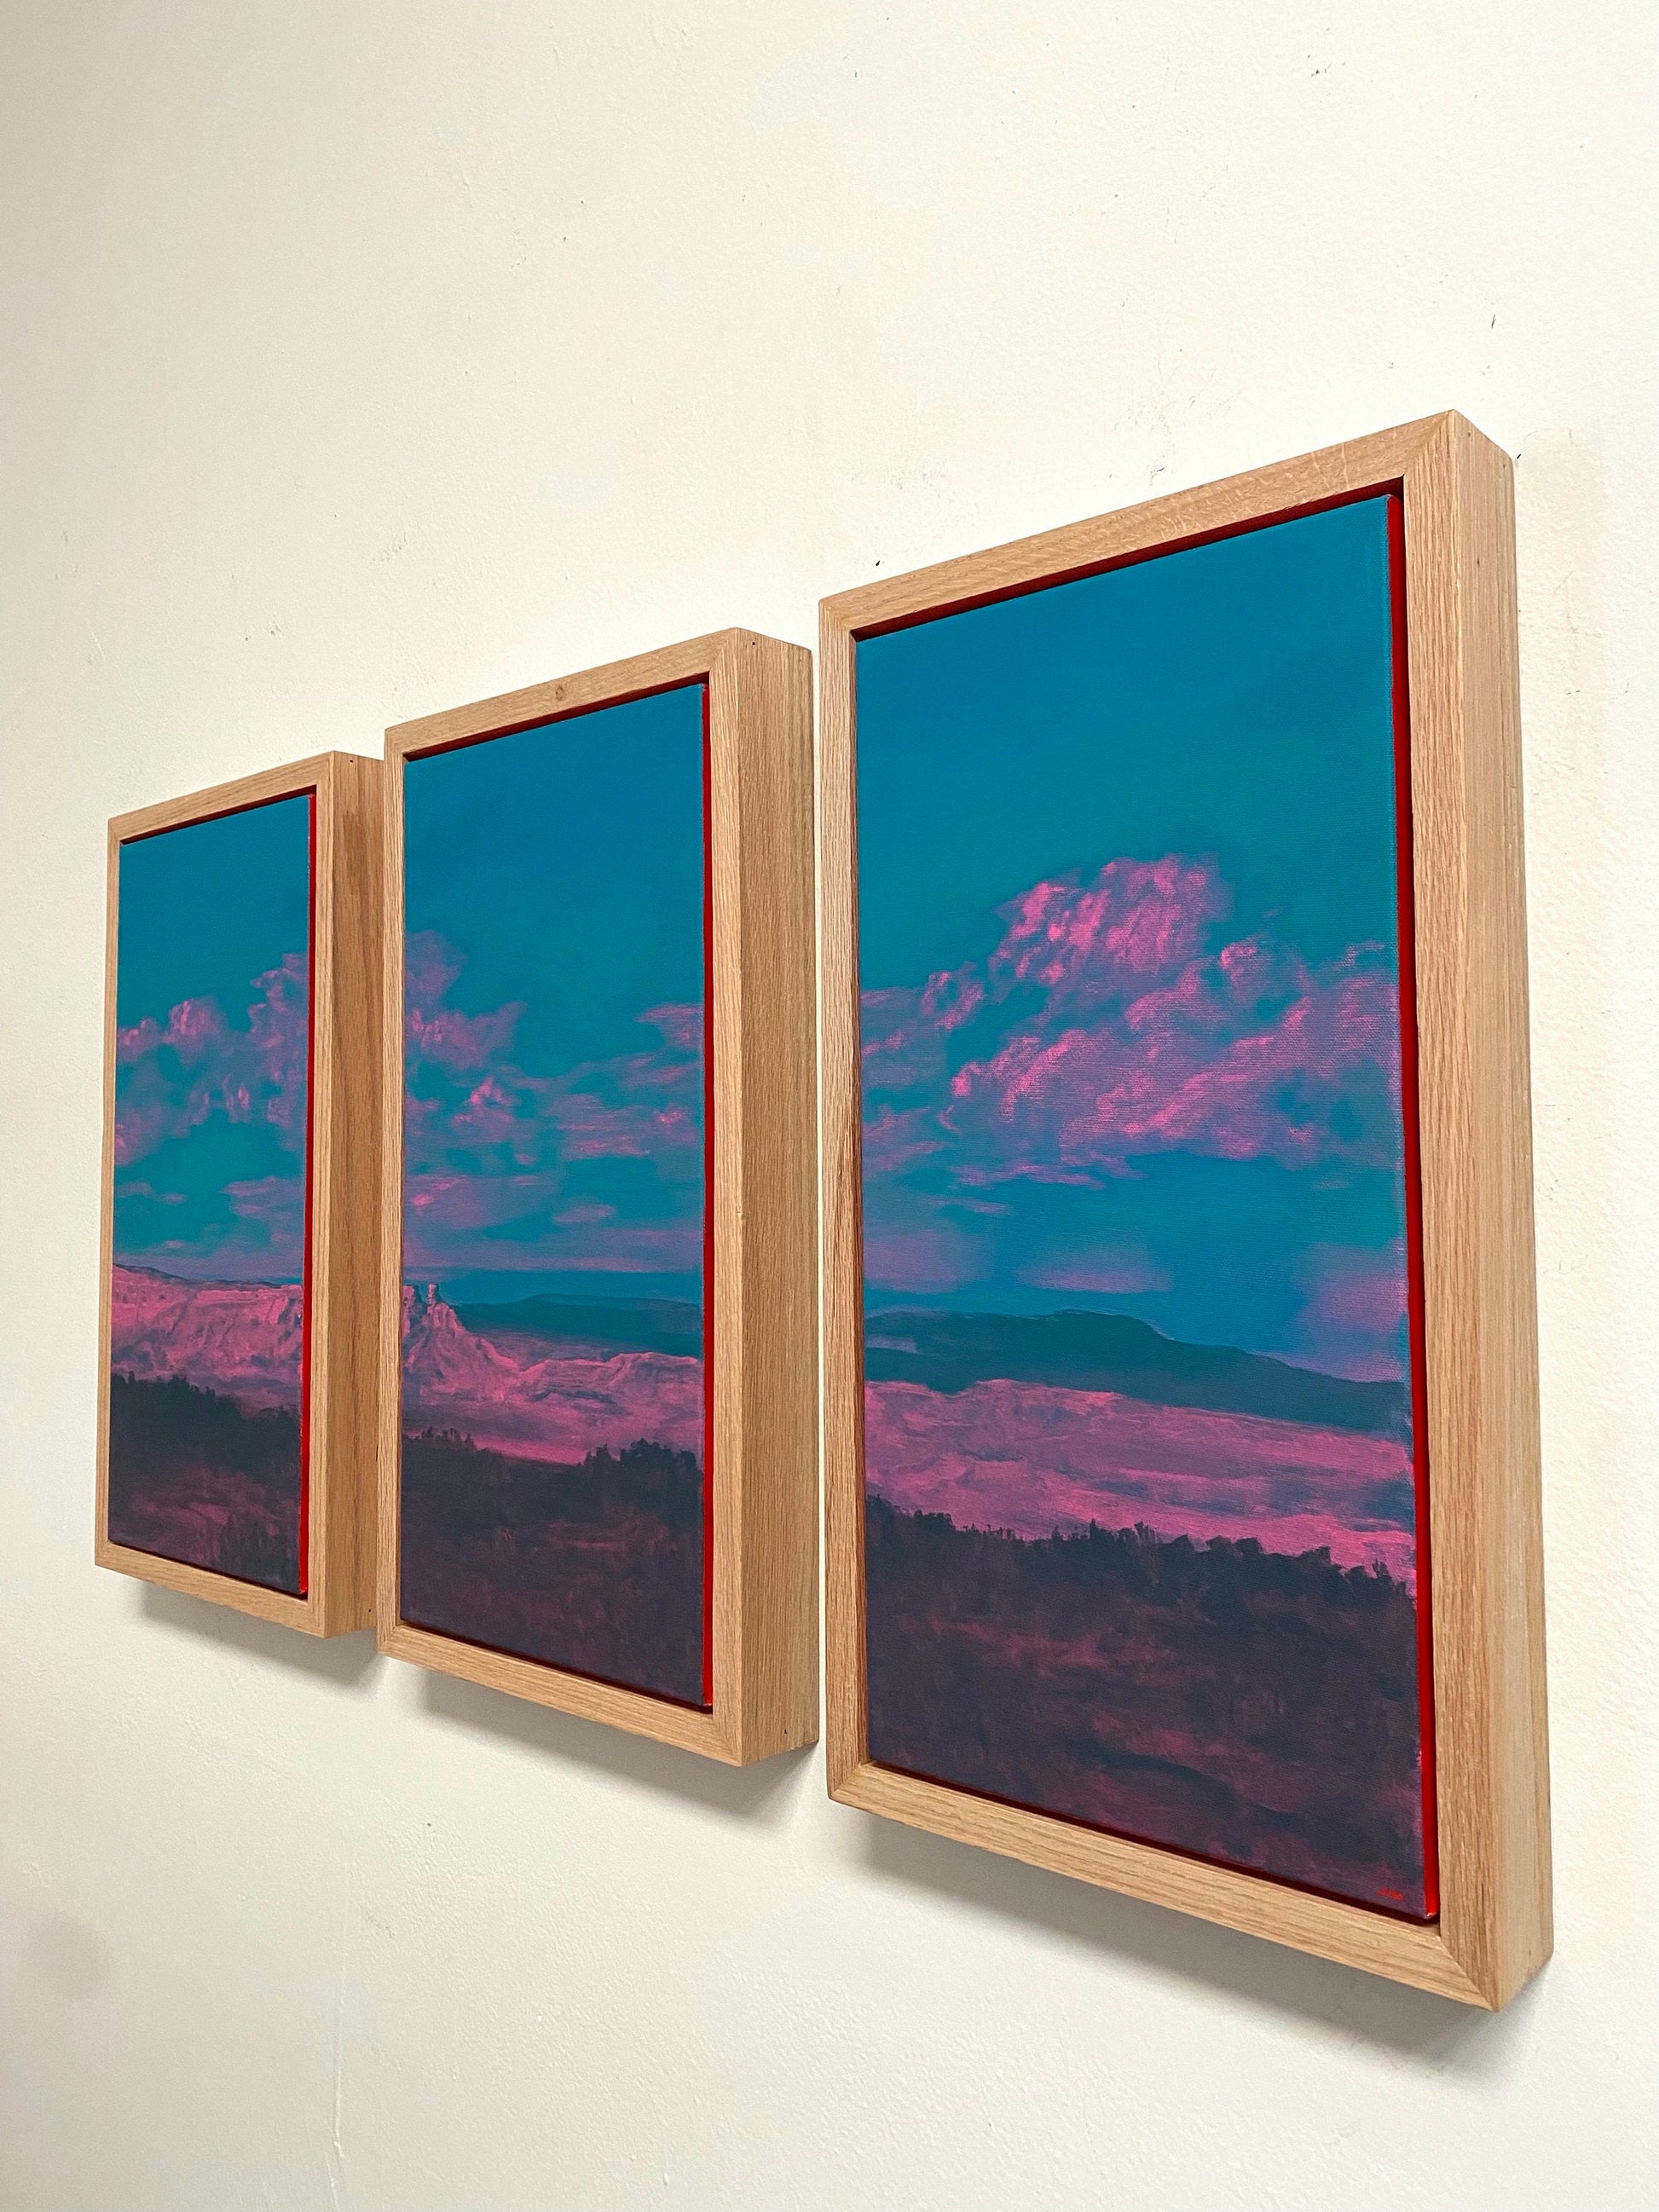 Ghost Ranch Triptych No.1 - Original Oil Paintings - Contemporary Southwest Landscape - Three 10 x 20 inch canvases in handmade frames